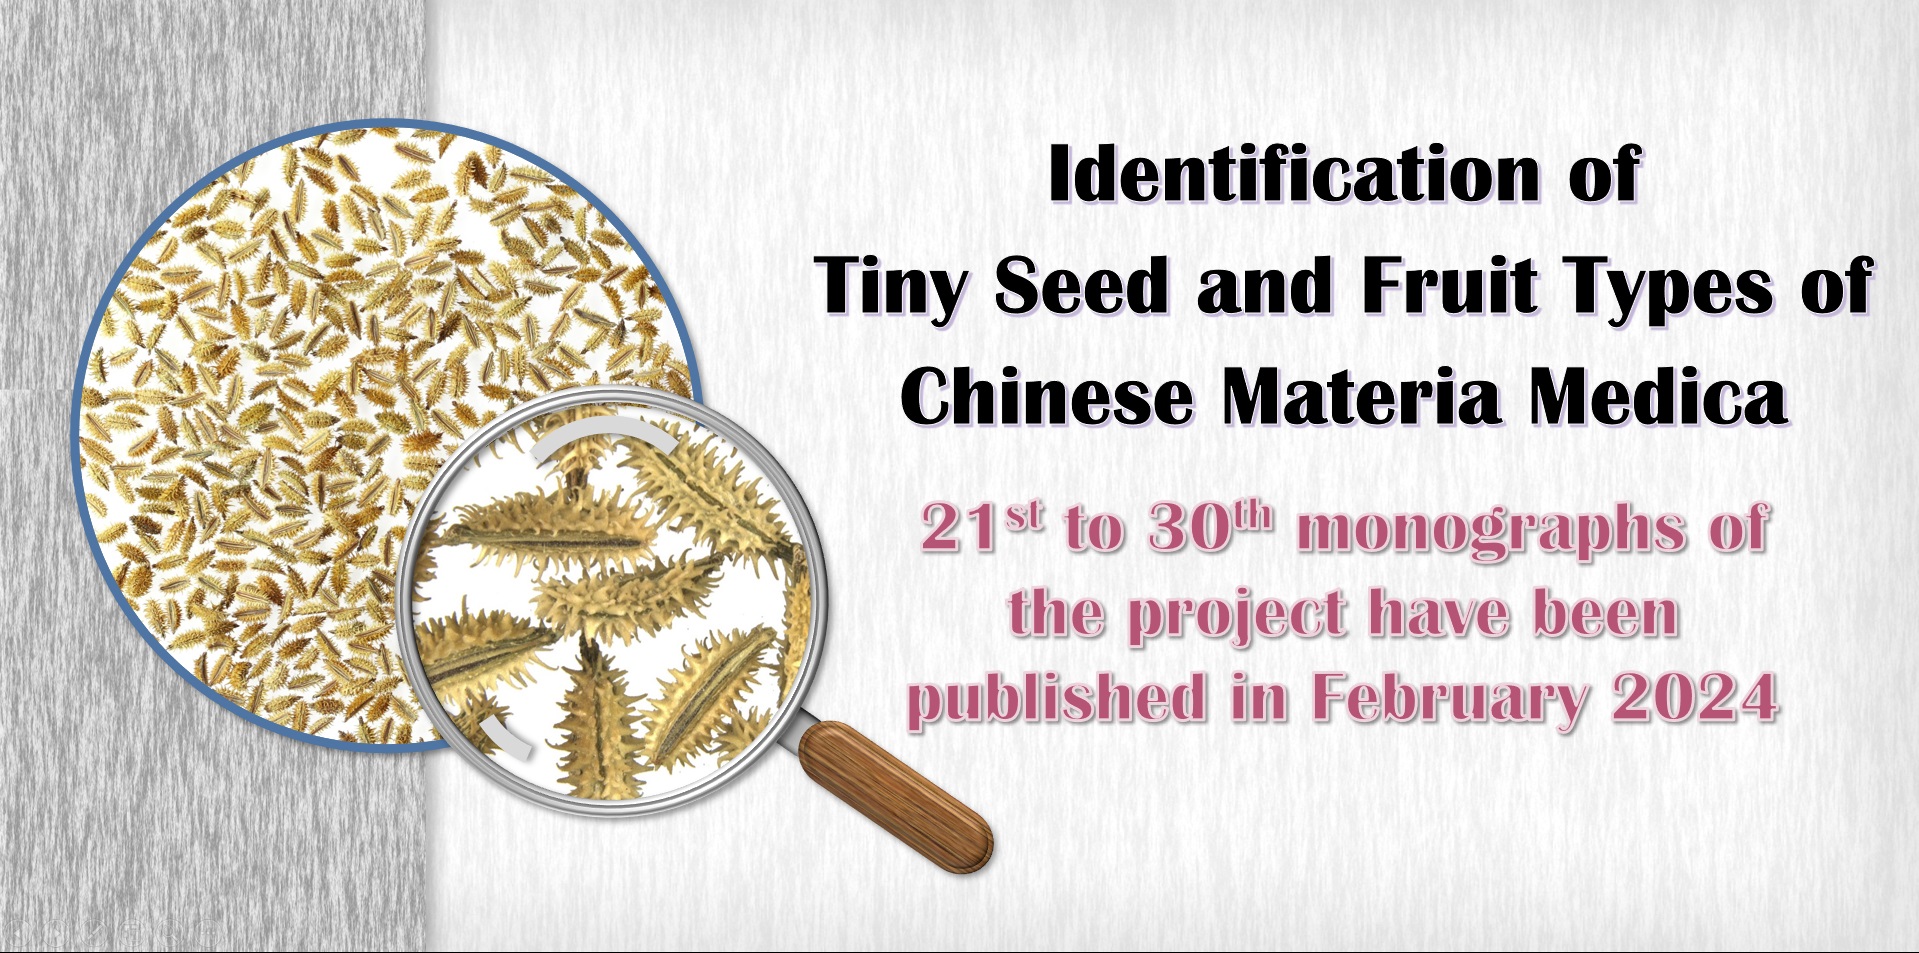 The 6th to 10th monographs of project “Identification of Tiny Seed and Fruit Types of Chinese Materia Medica” have been published in February 2023